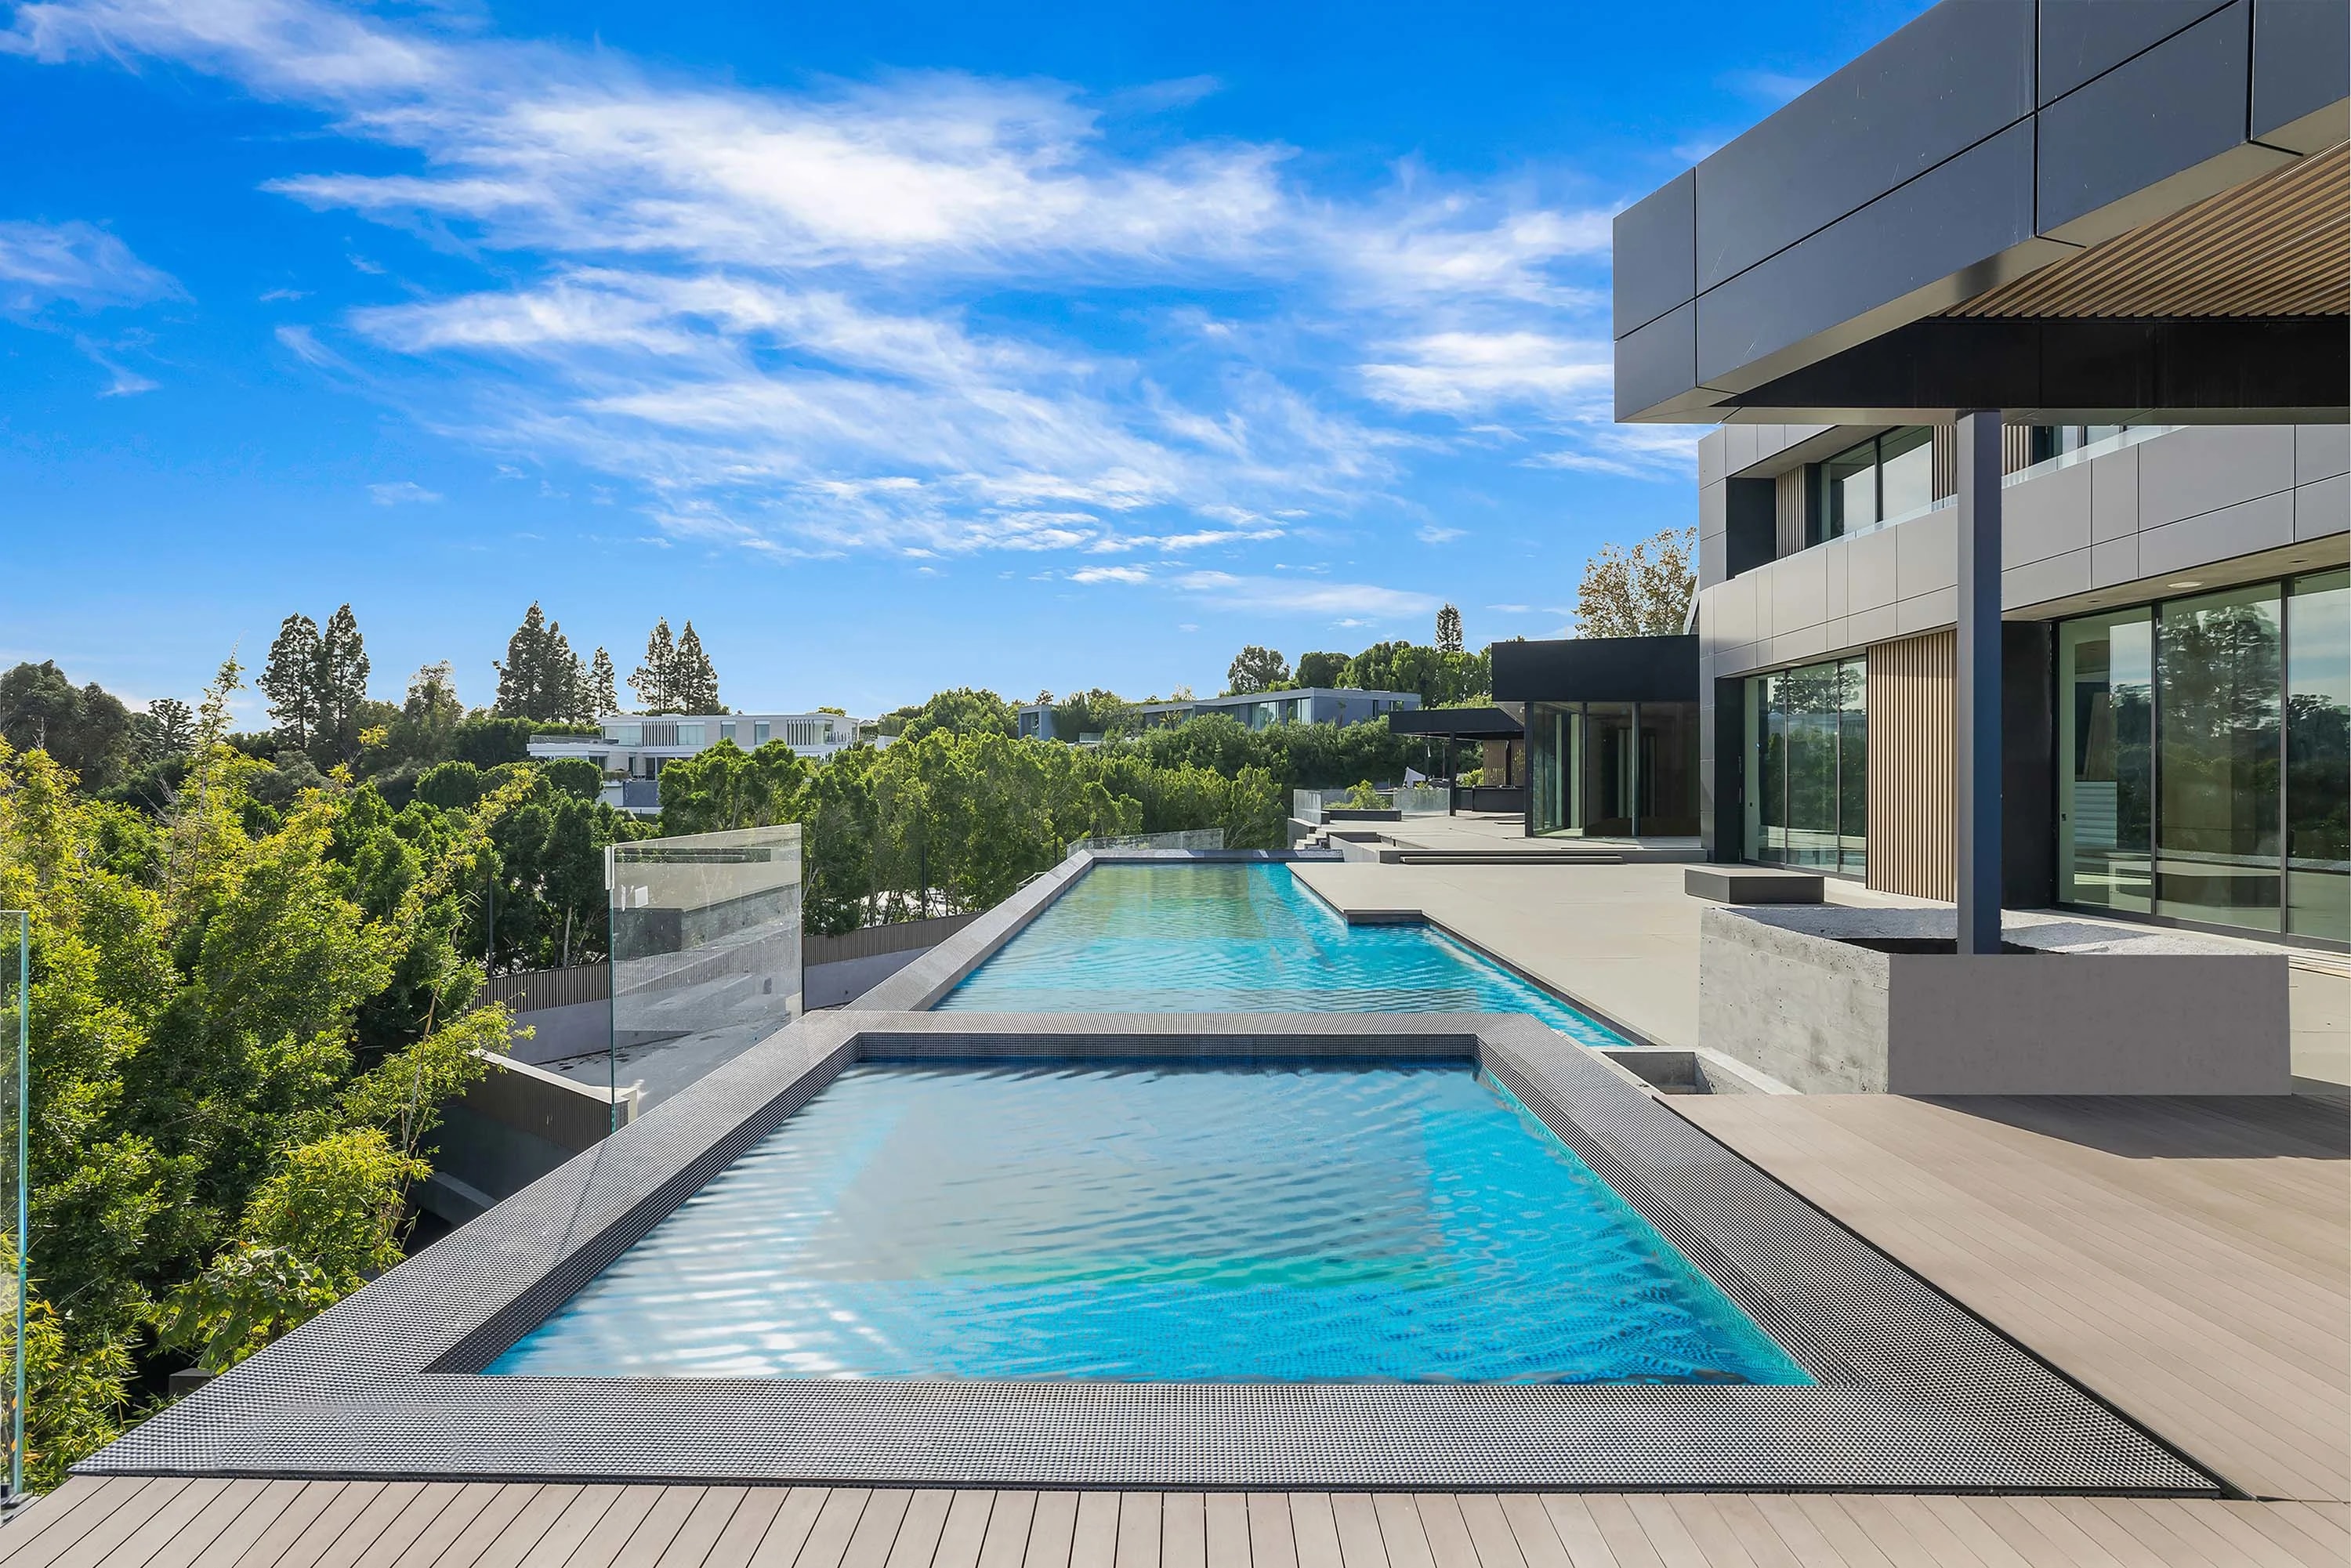 Bel Air Trophy Property Achieves $18.844 Million at Auction in Just 32 Days